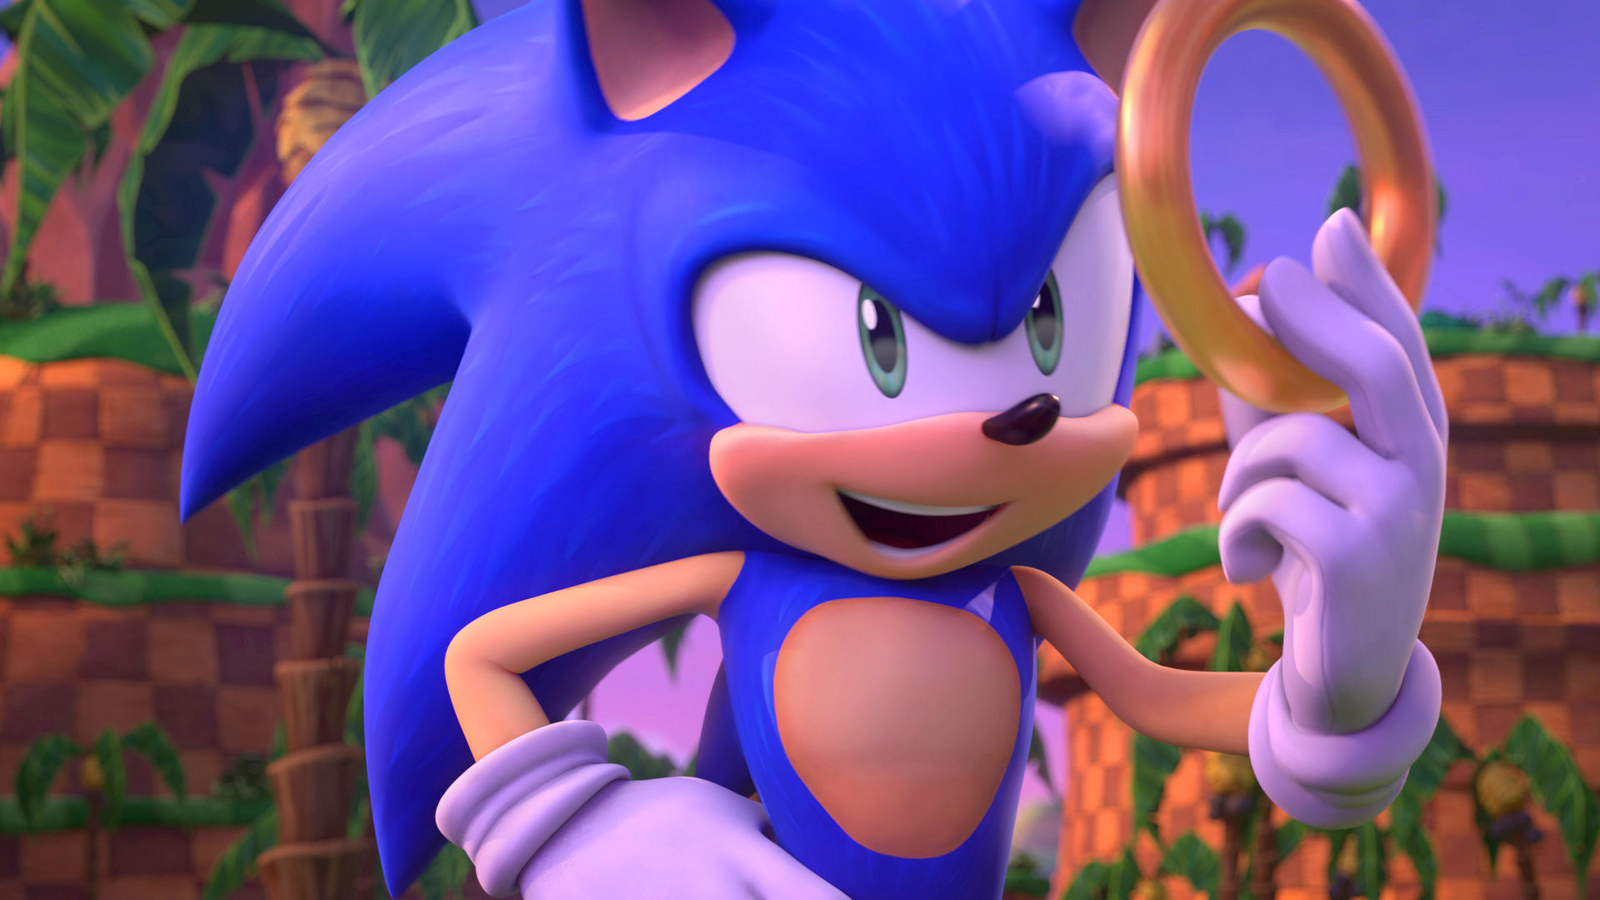 Sonic doesn't care about copyright laws. : r/SonicTheHedgehog